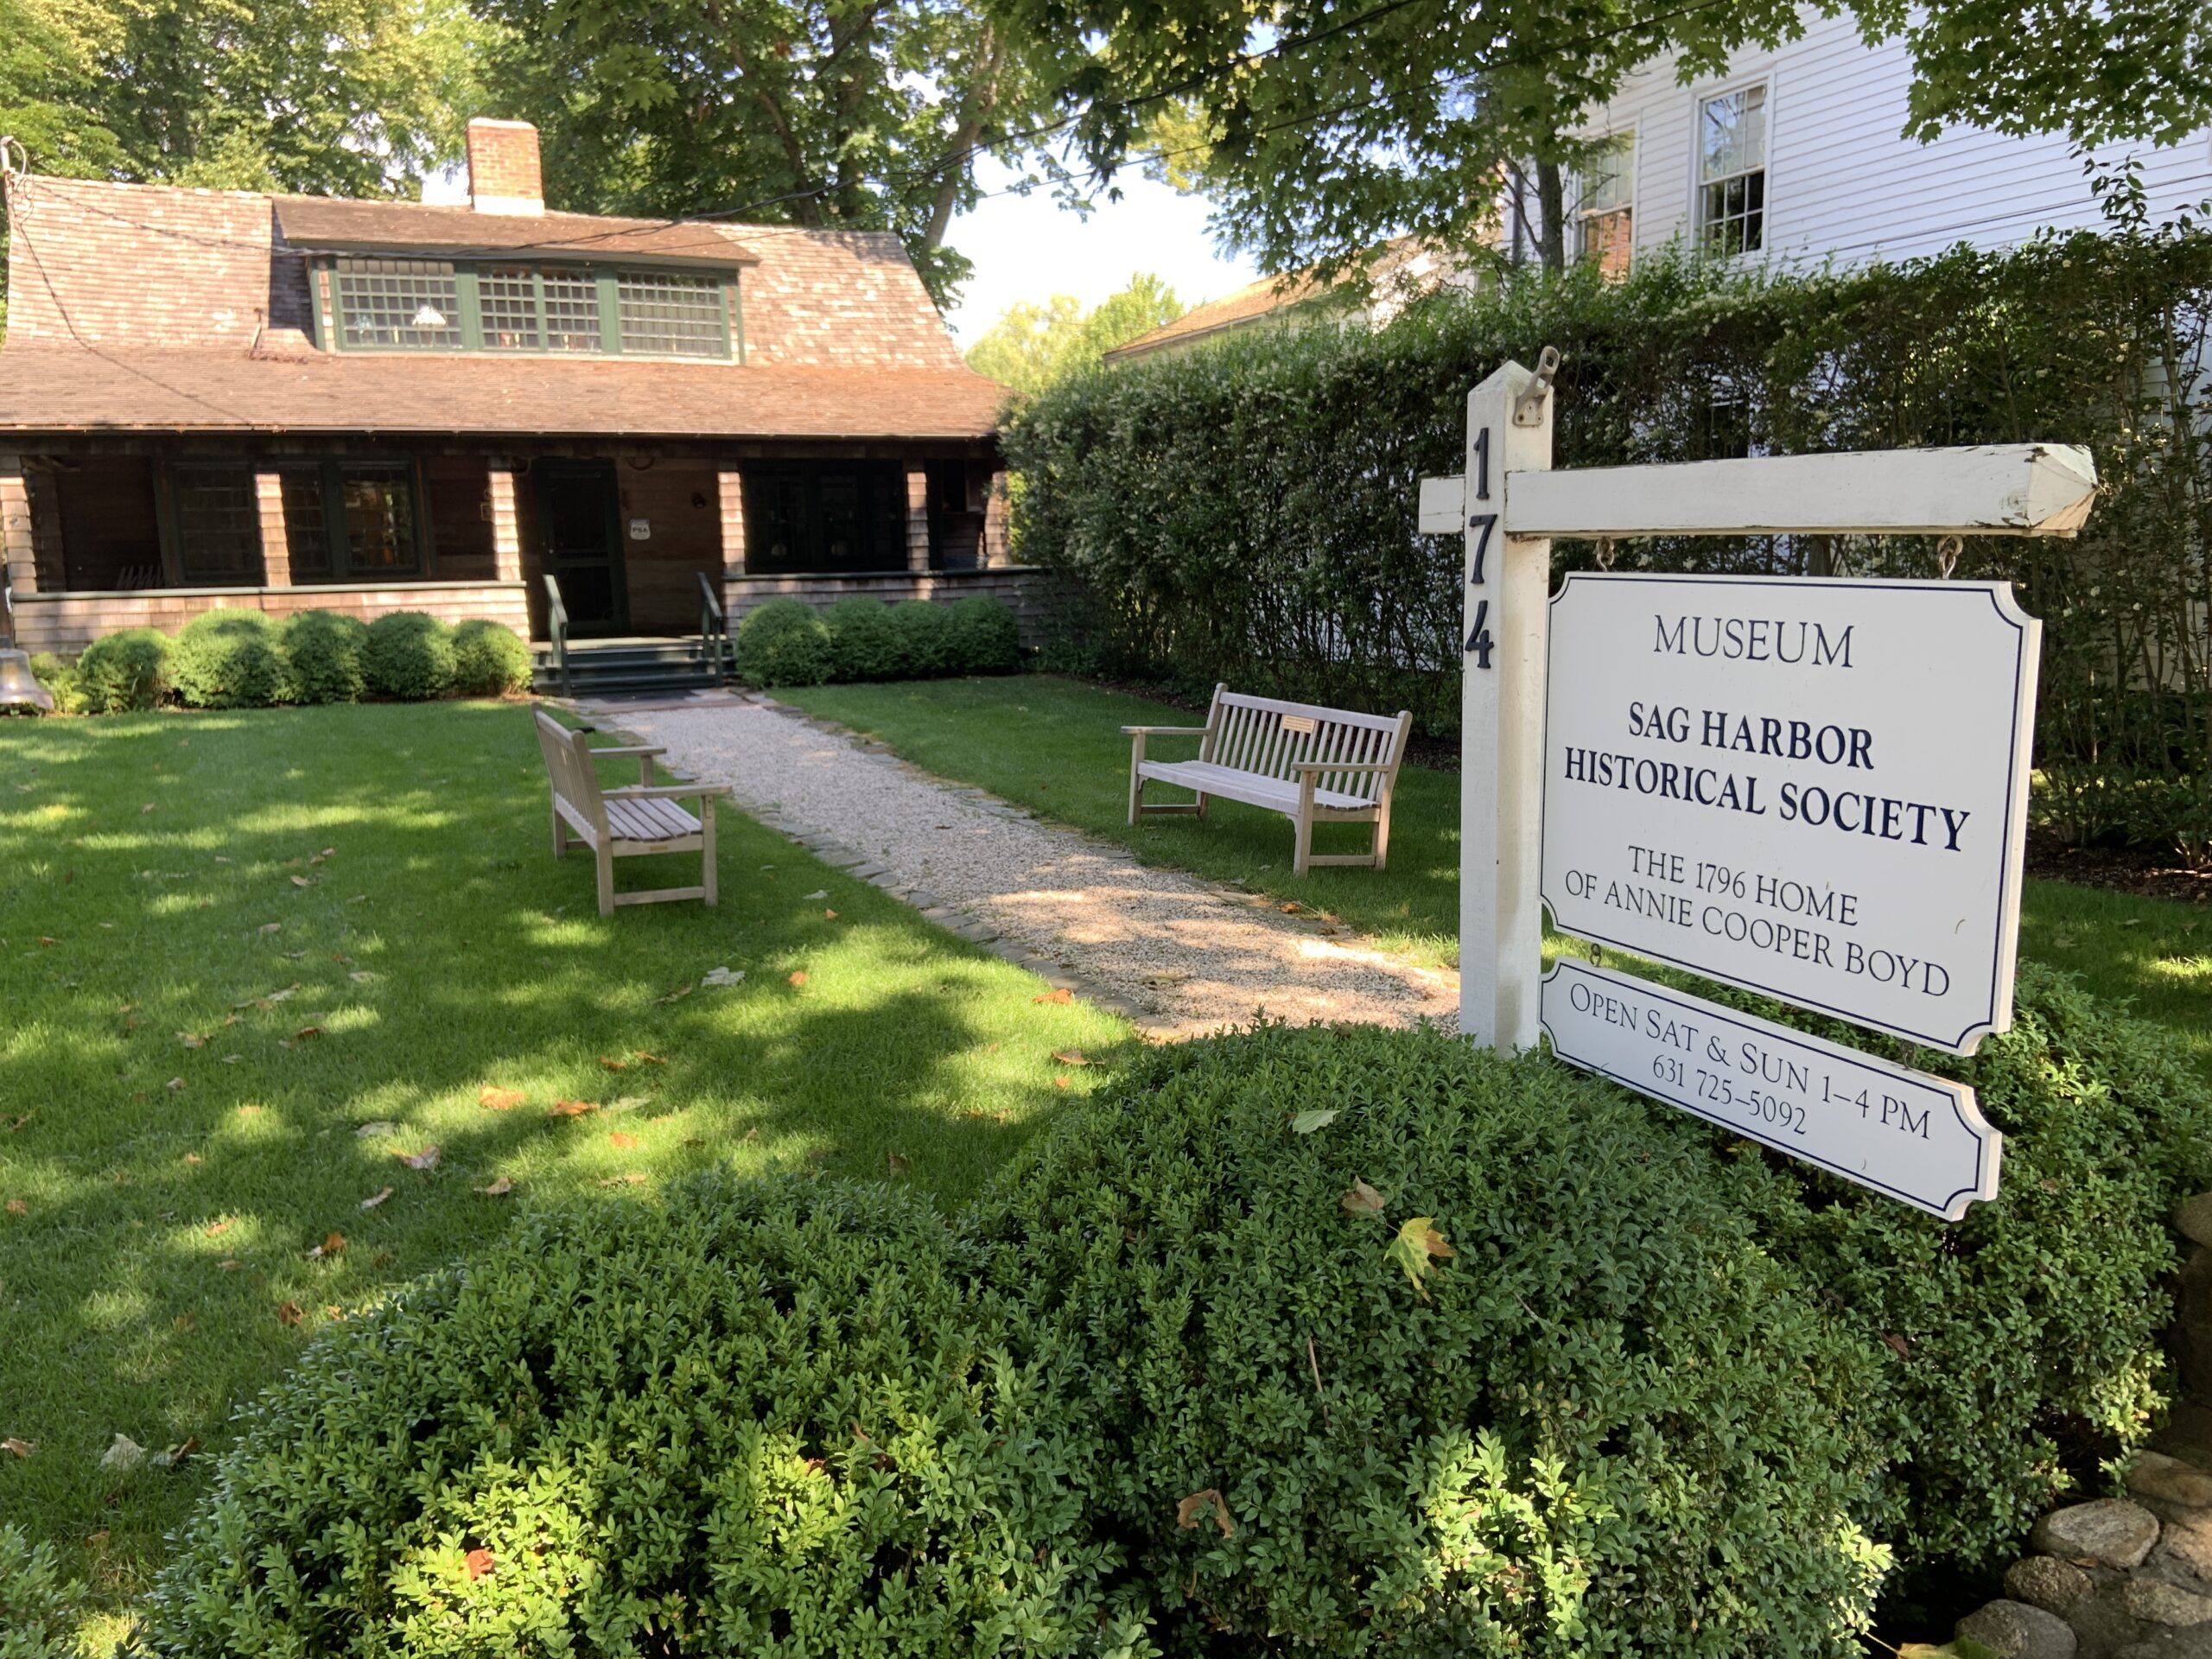 Although the sign says the Annie Cooper Boyd home was built in 1796, members of the Sag Harbor Historical Society hope to prove it is much older. STEPHEN J. KOTZ